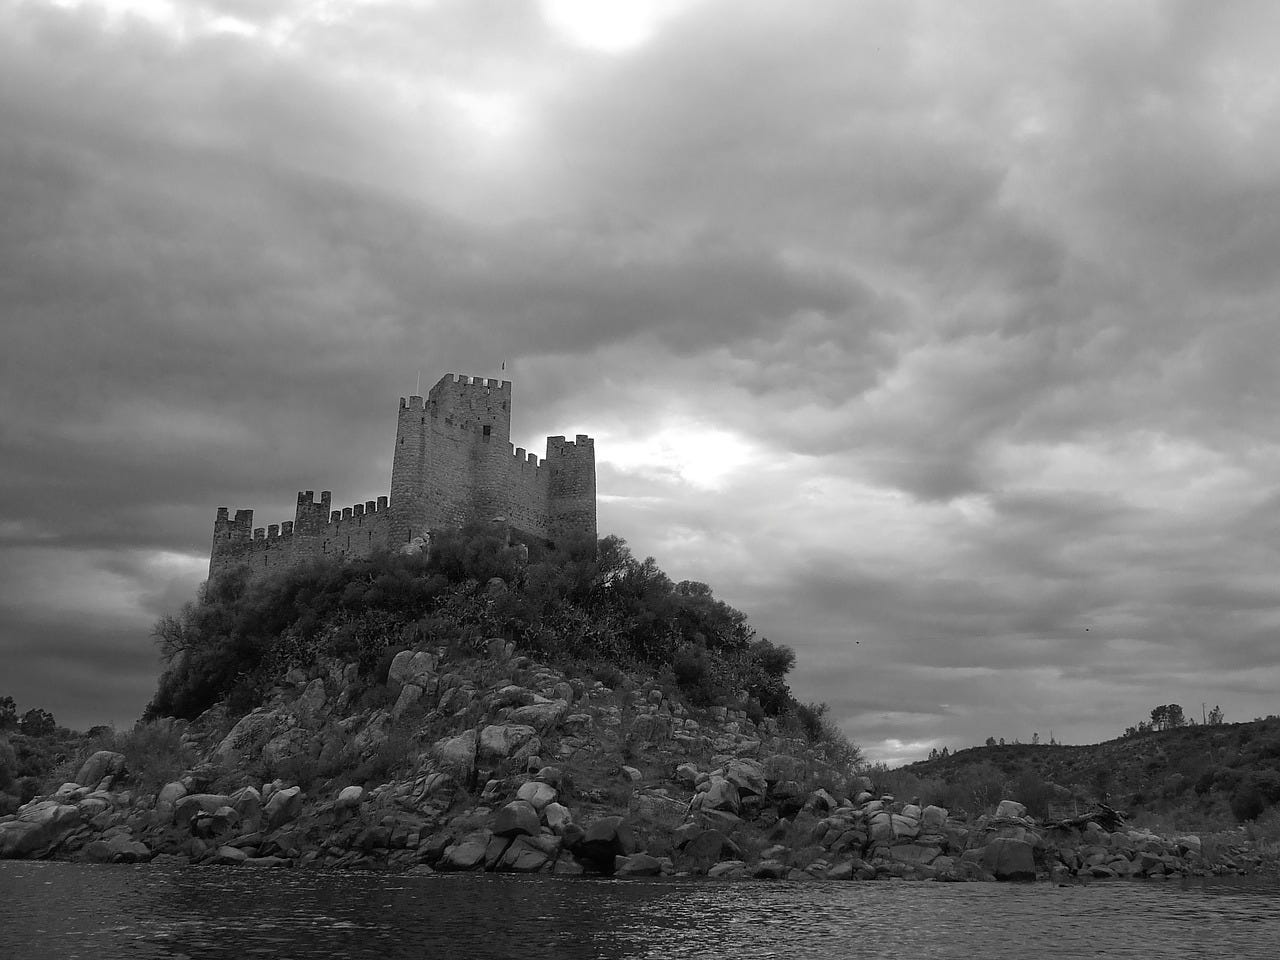 A small castle sits on a rocky hill surrounded by water, with heavy gray clouds above.